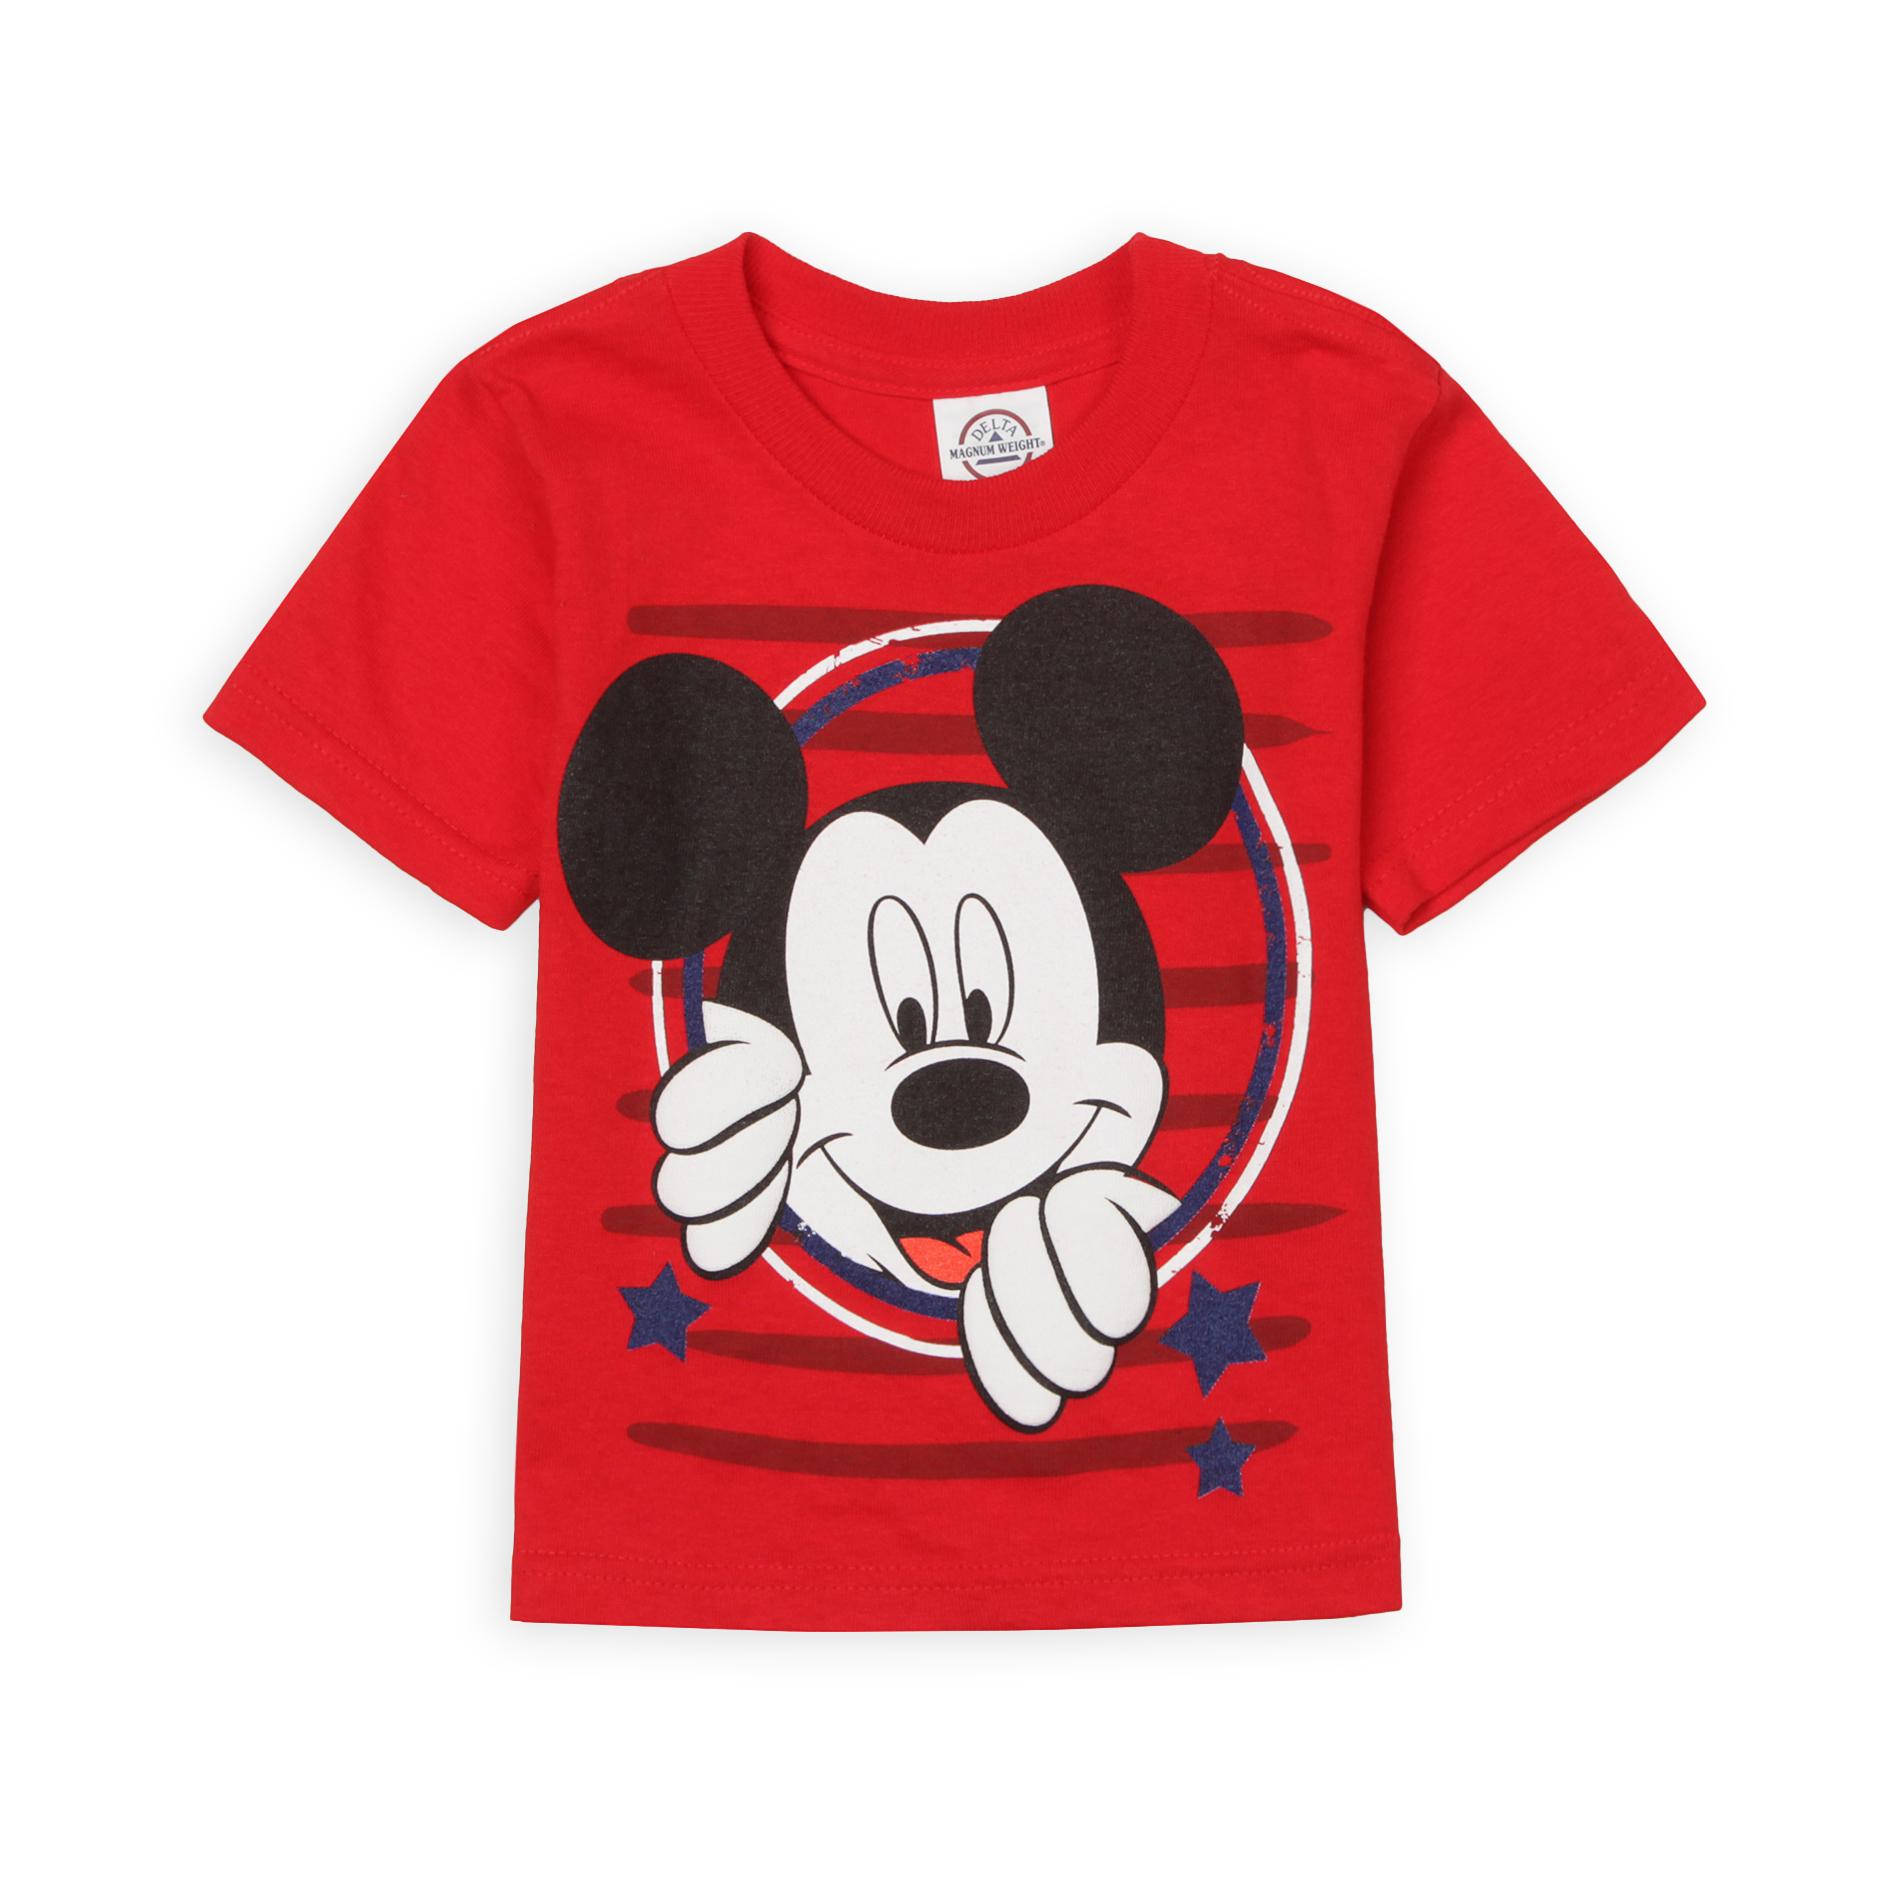 Disney Toddler Boy's Graphic T-Shirt - Mickey Mouse